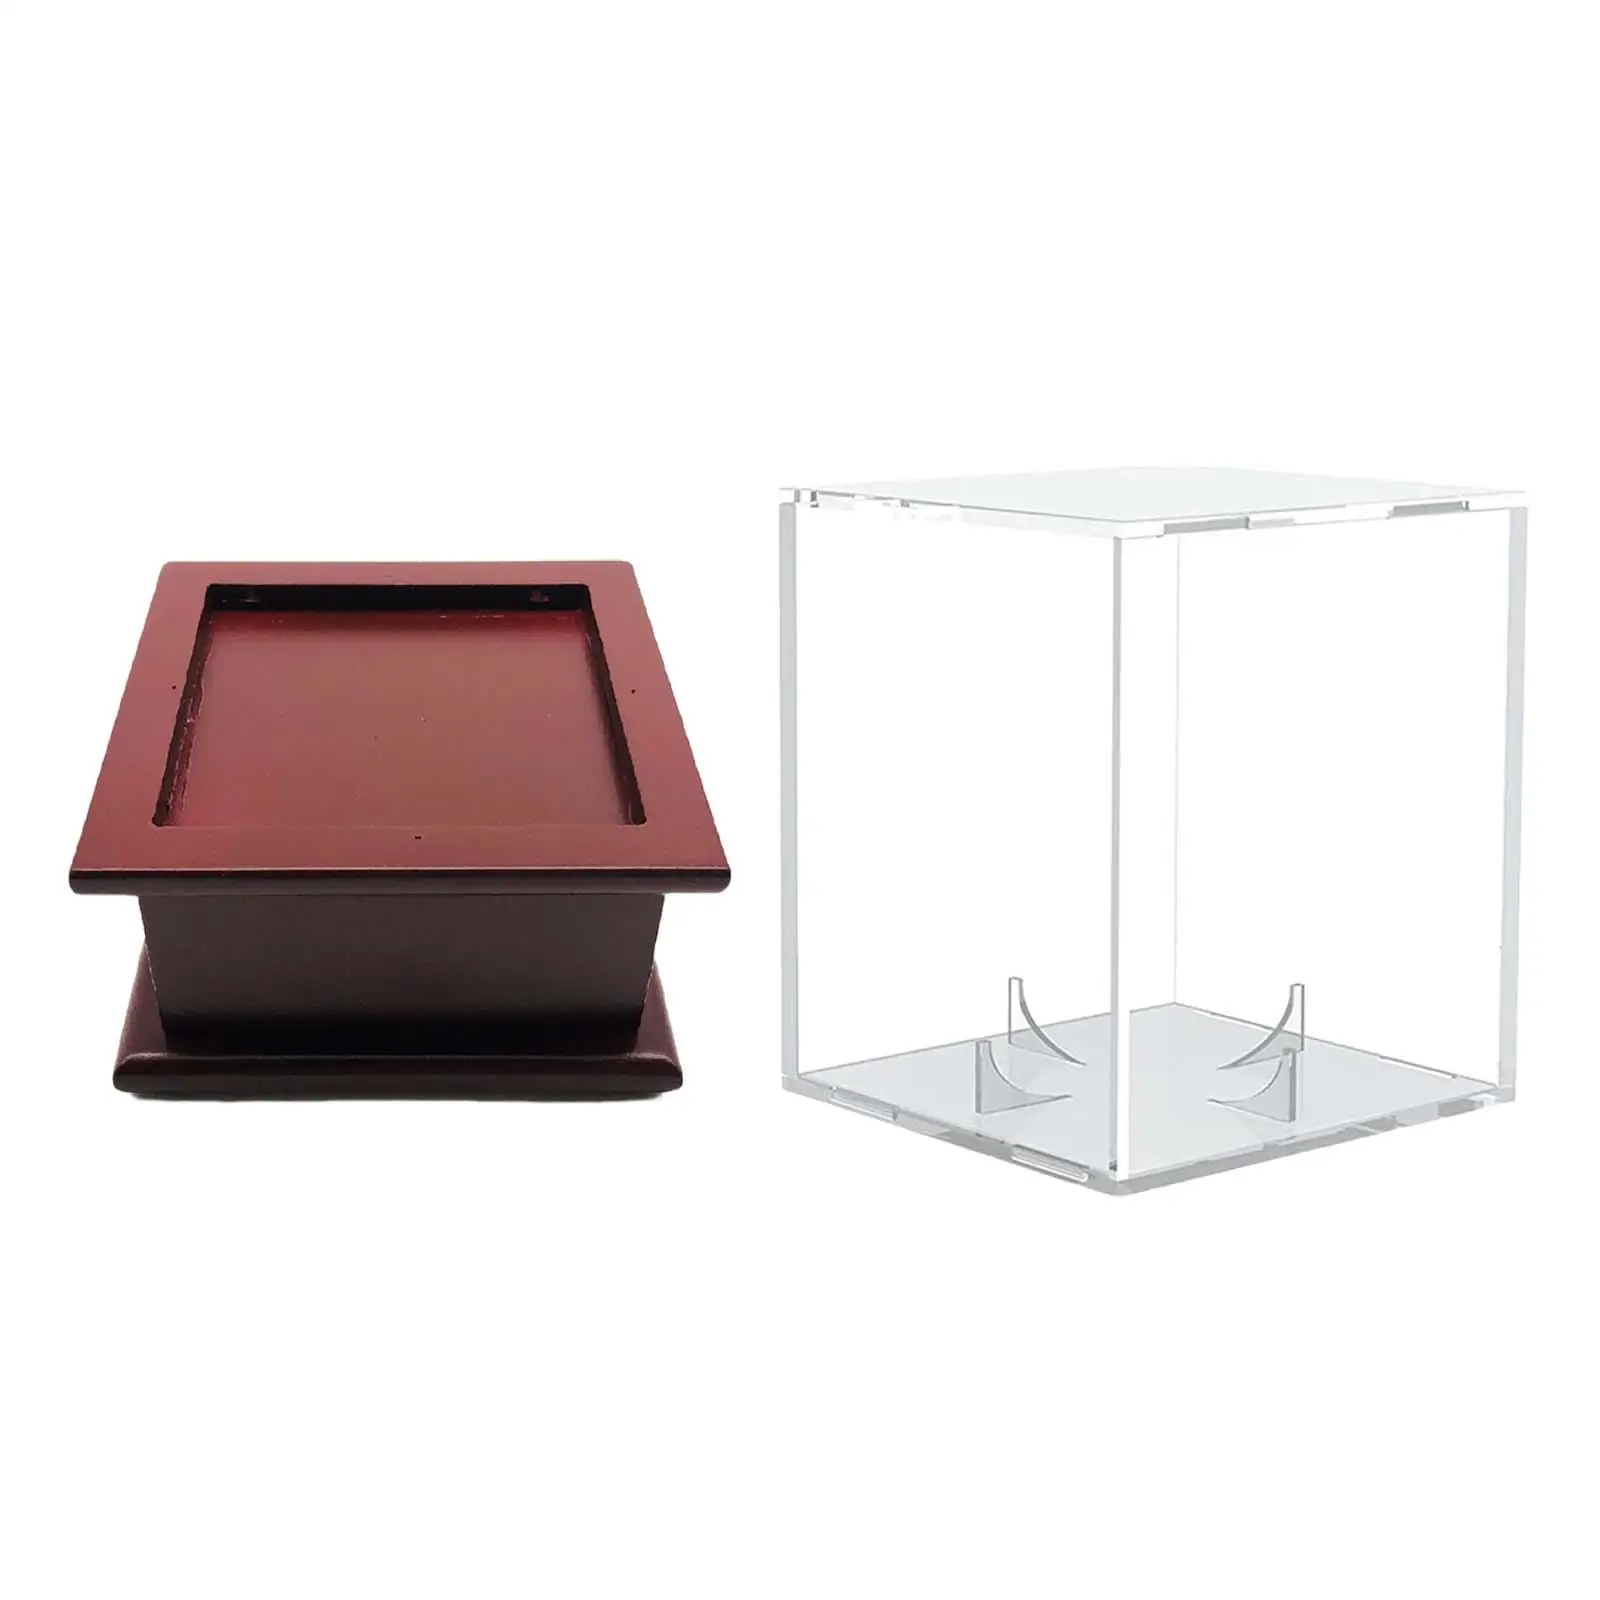 Ball Display, Baseball Holder, Clear Dustproof Protection Ball Holder Square,